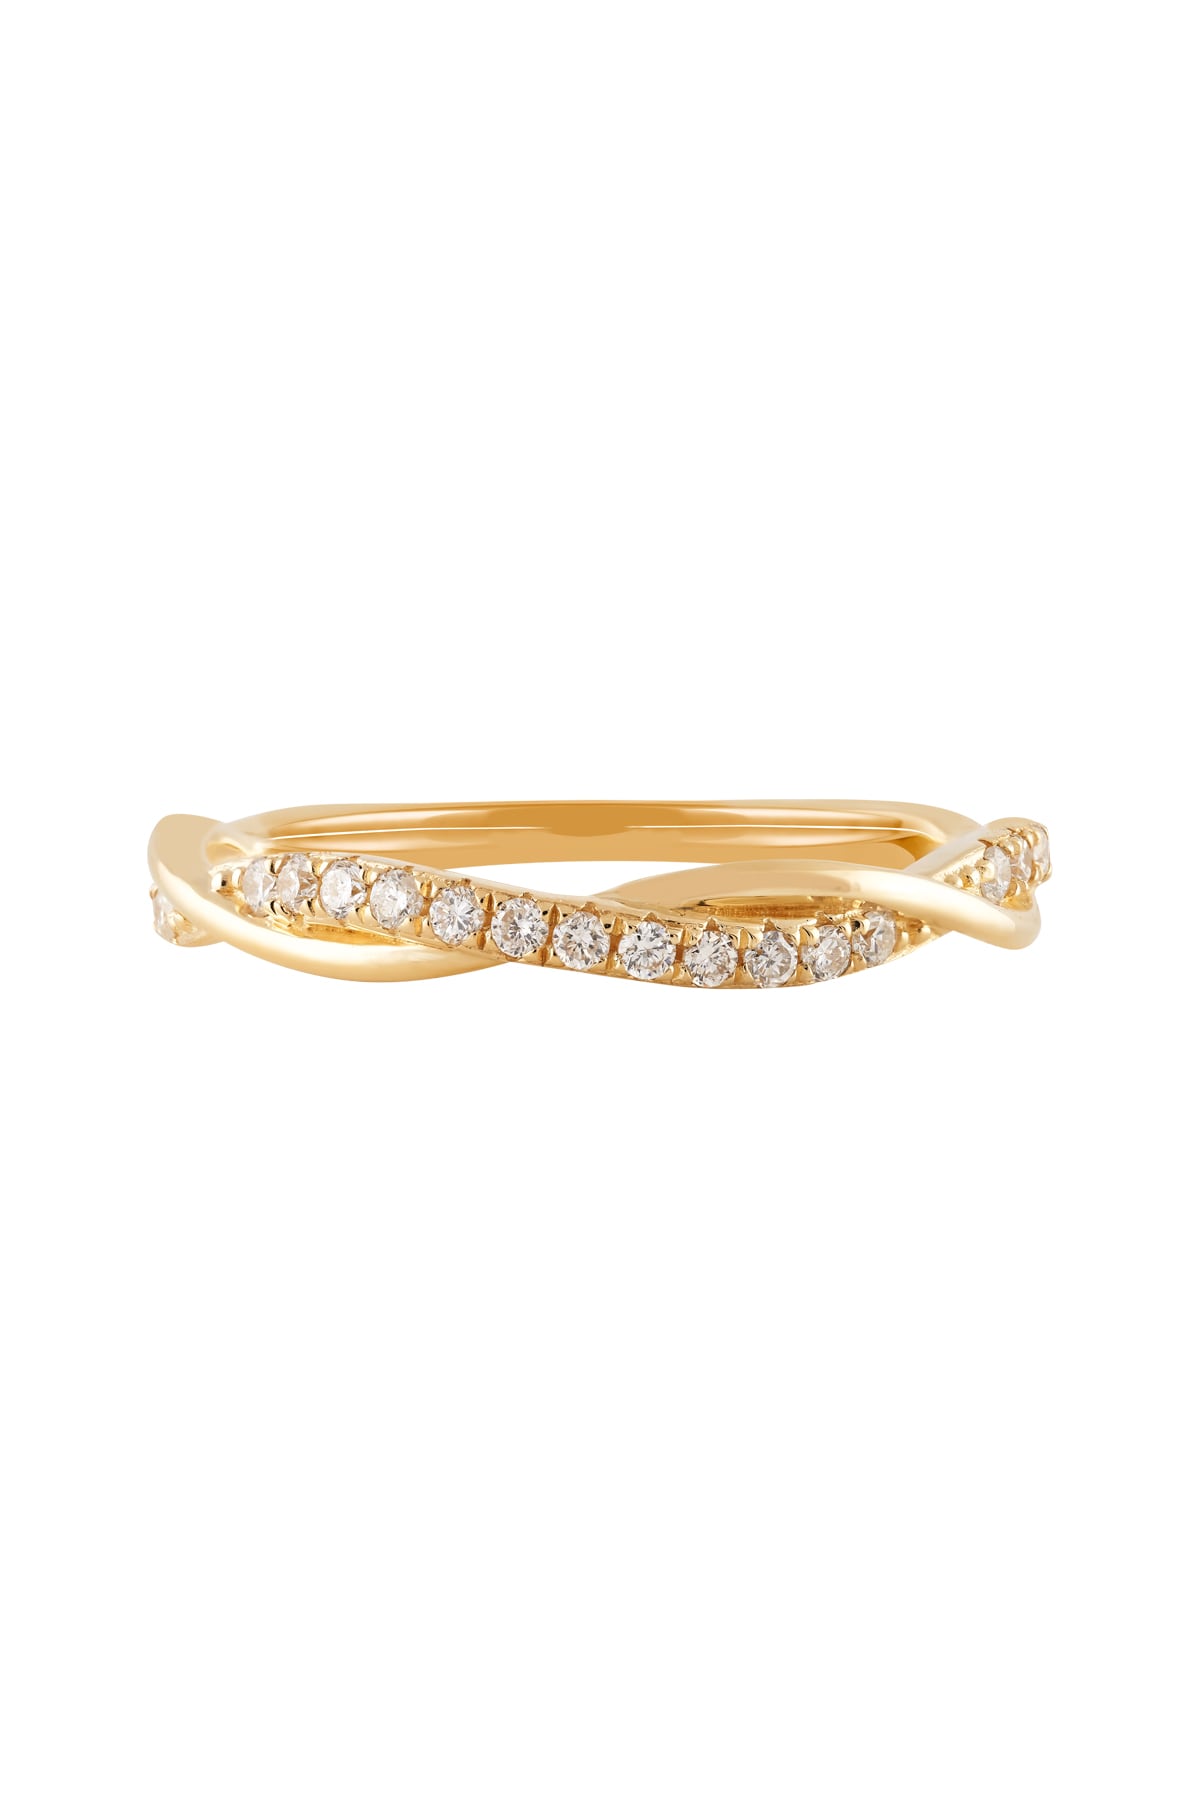 9ct Yellow Gold Twisted Style Diamond Band from LeGassick.